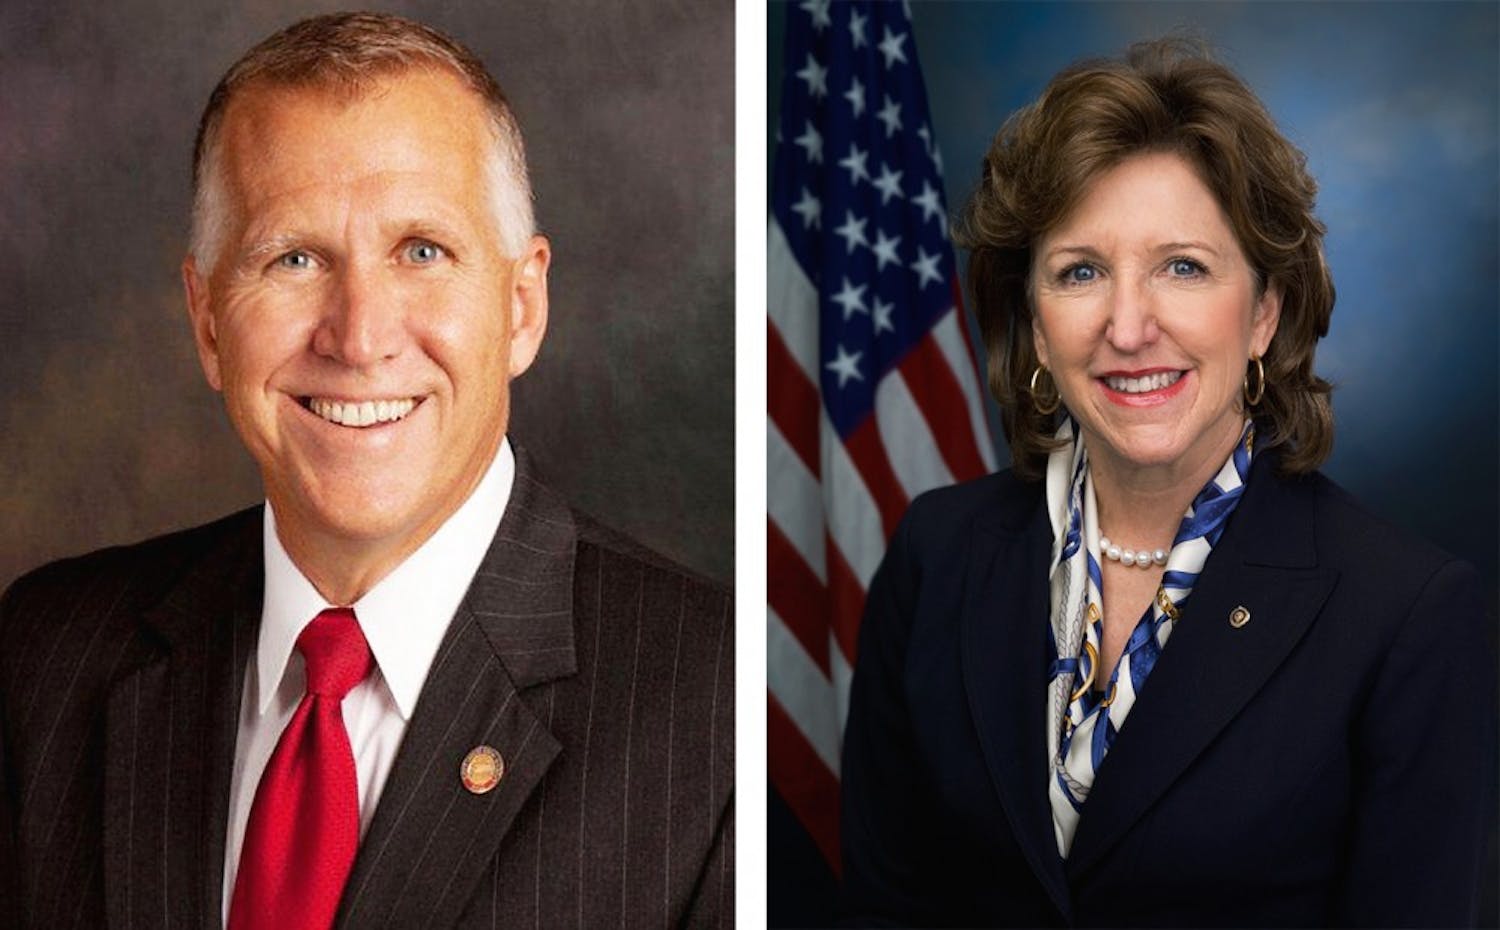 Last week, Speaker of the N.C. House Thom Tillis (left) released two campaign ads attacking incumbent Senator Kay Hagan (right) on her decisions concerning foreign policy crises in the Middle East.